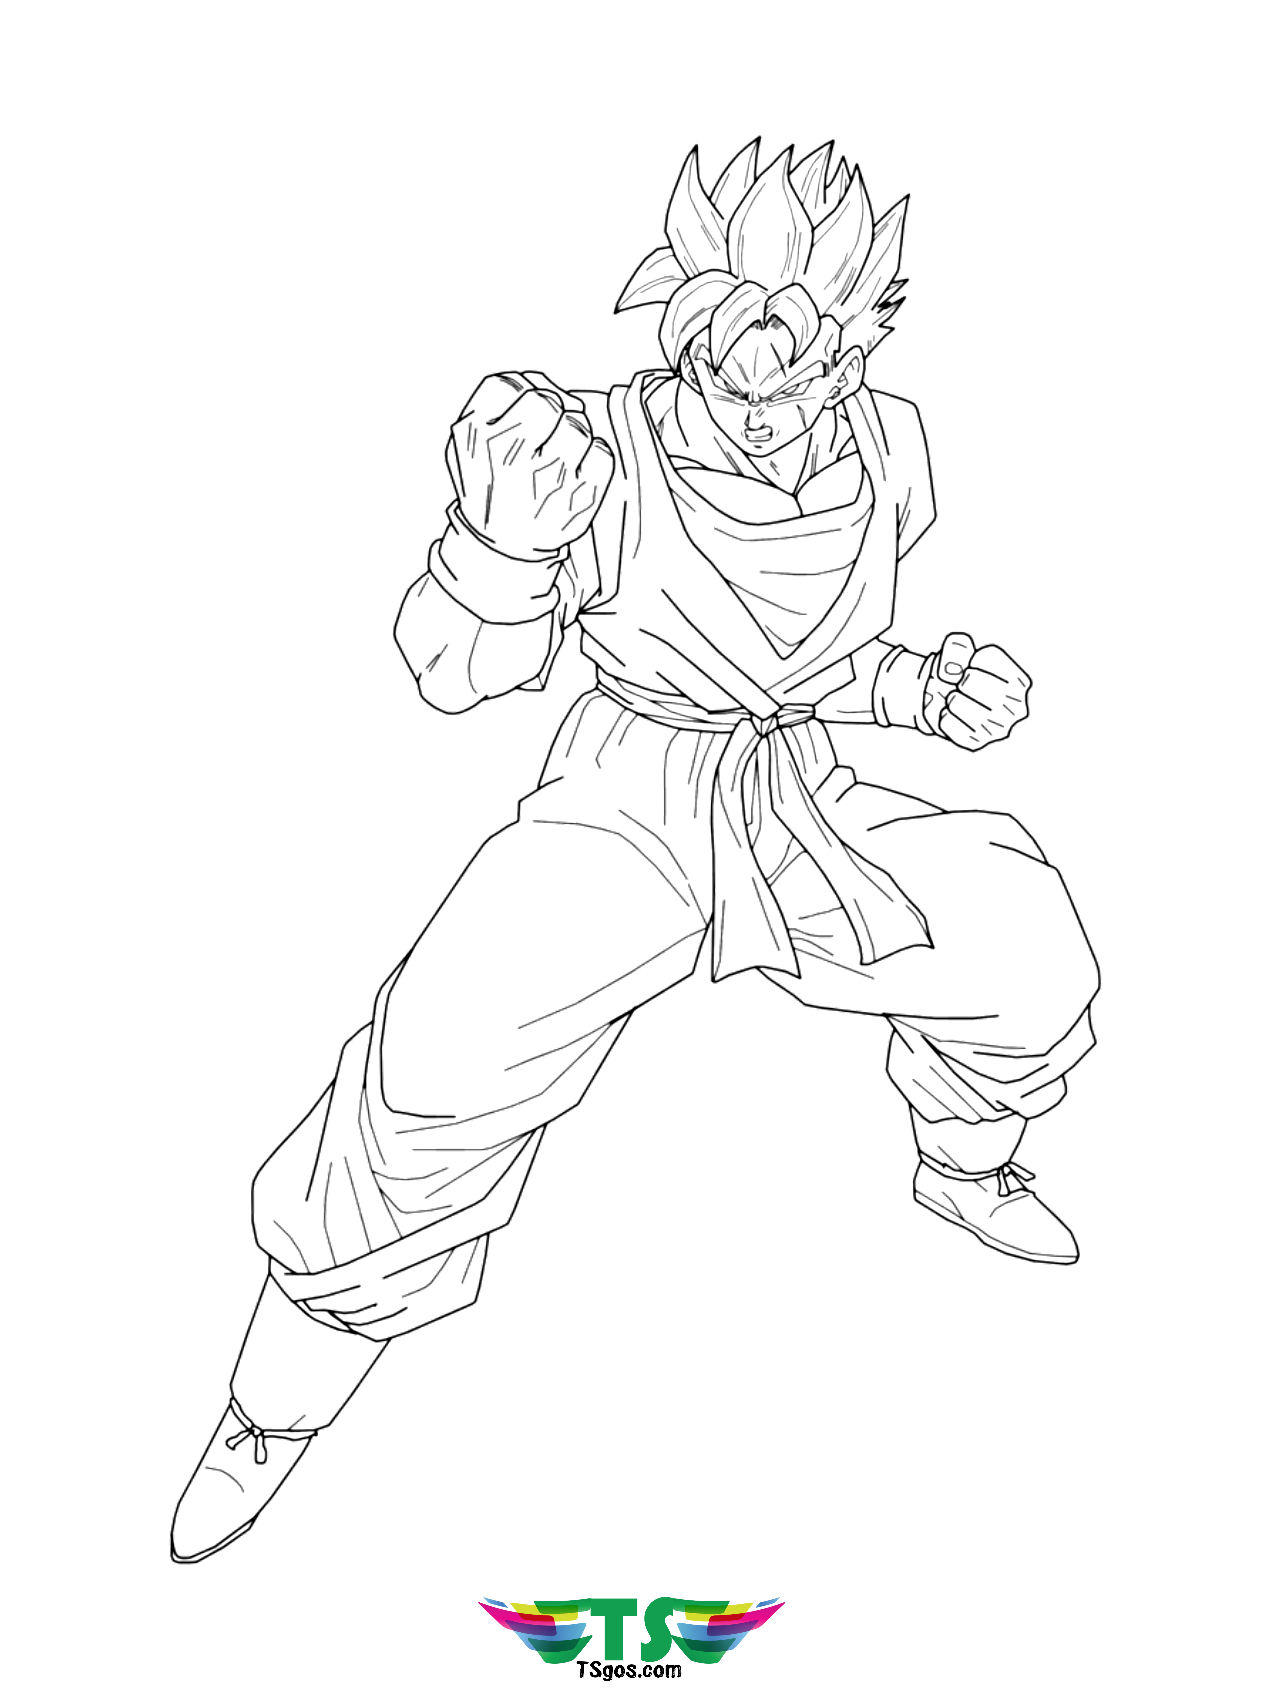 Dragon Ball Z printable coloring picture.